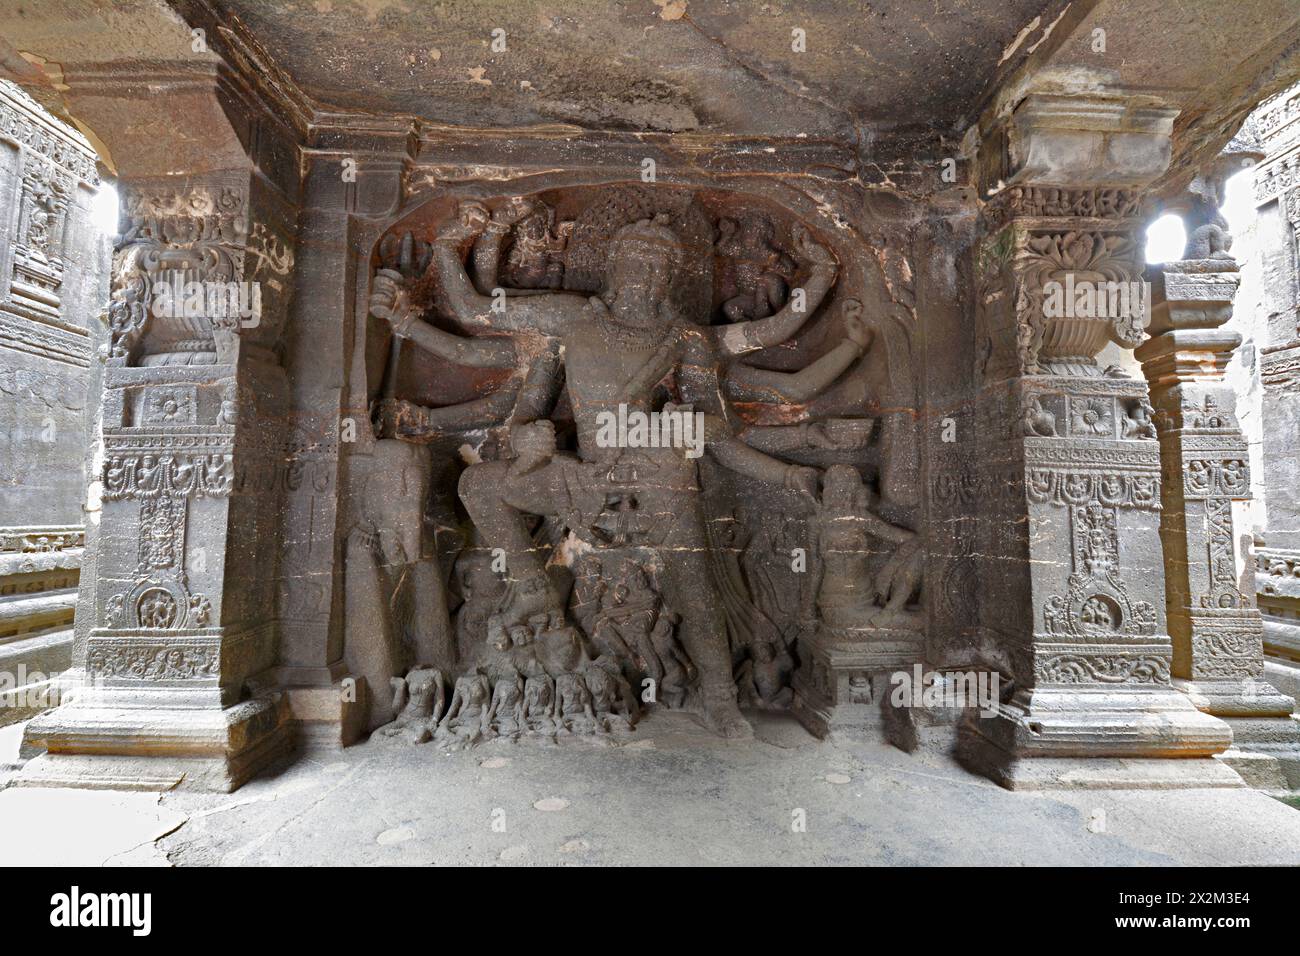 Ellora Brahmanical Caves: Kailas a No 16 Siva Killing the demon Andhaka at the entrance to the Kailas a temple complex. Stock Photo